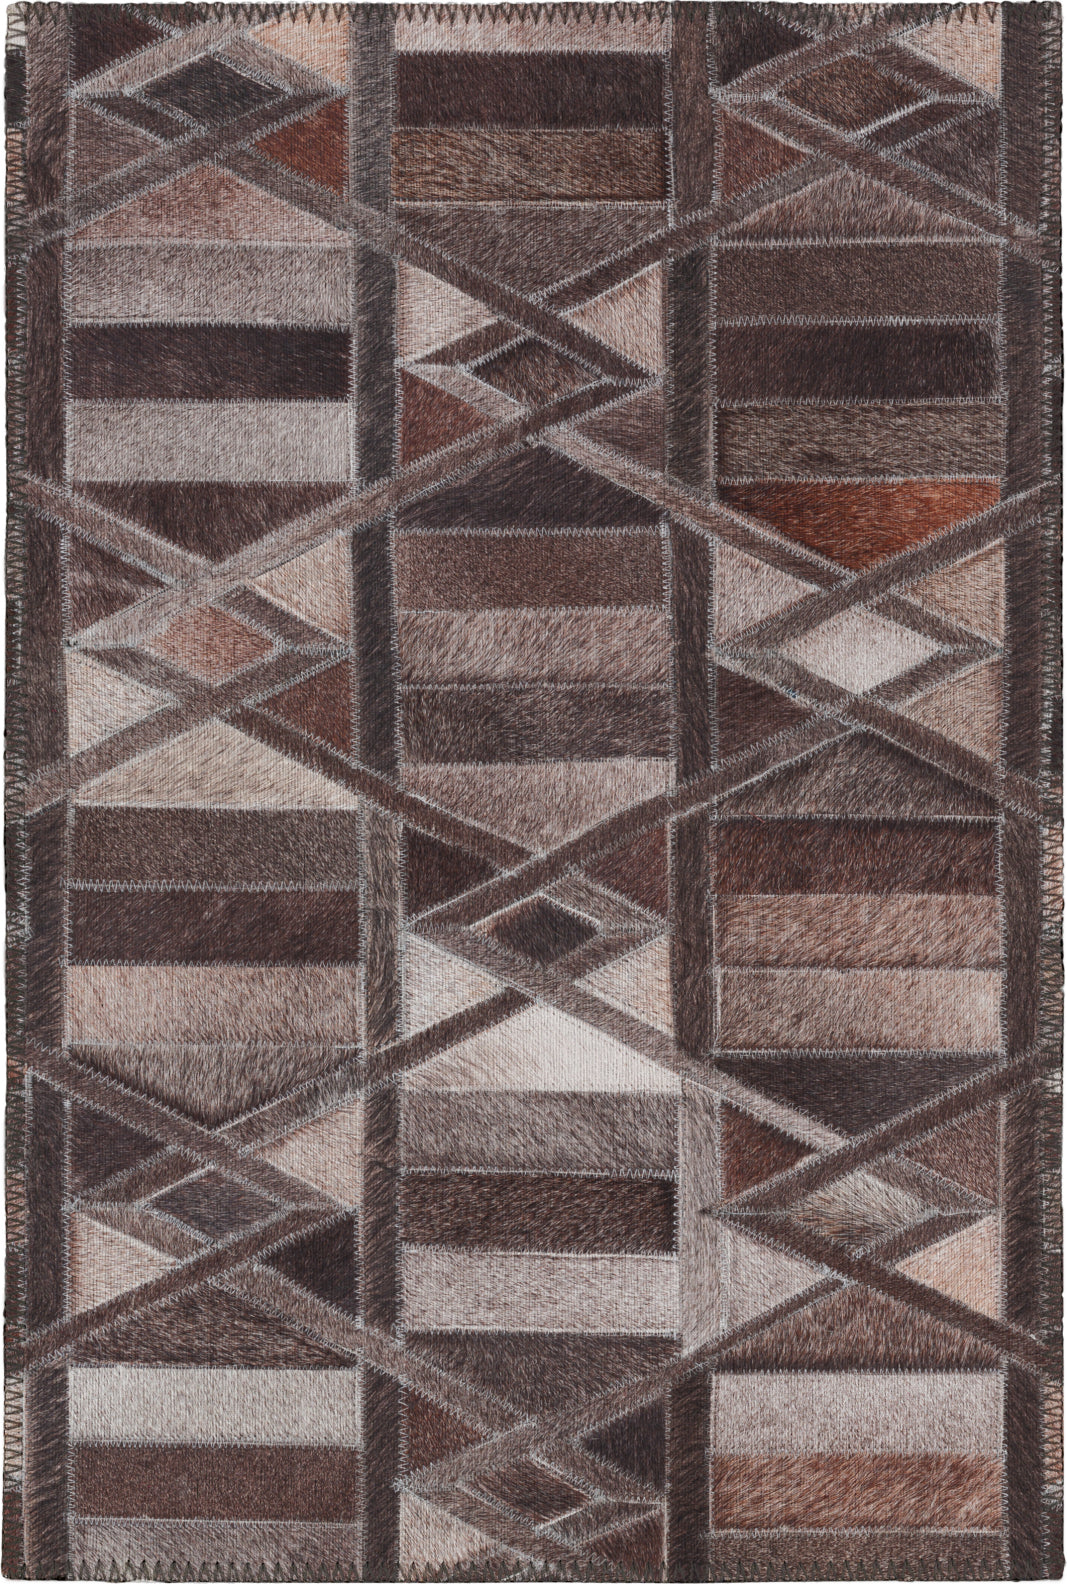 Dalyn Stetson SS4 Flannel Area Rug main image